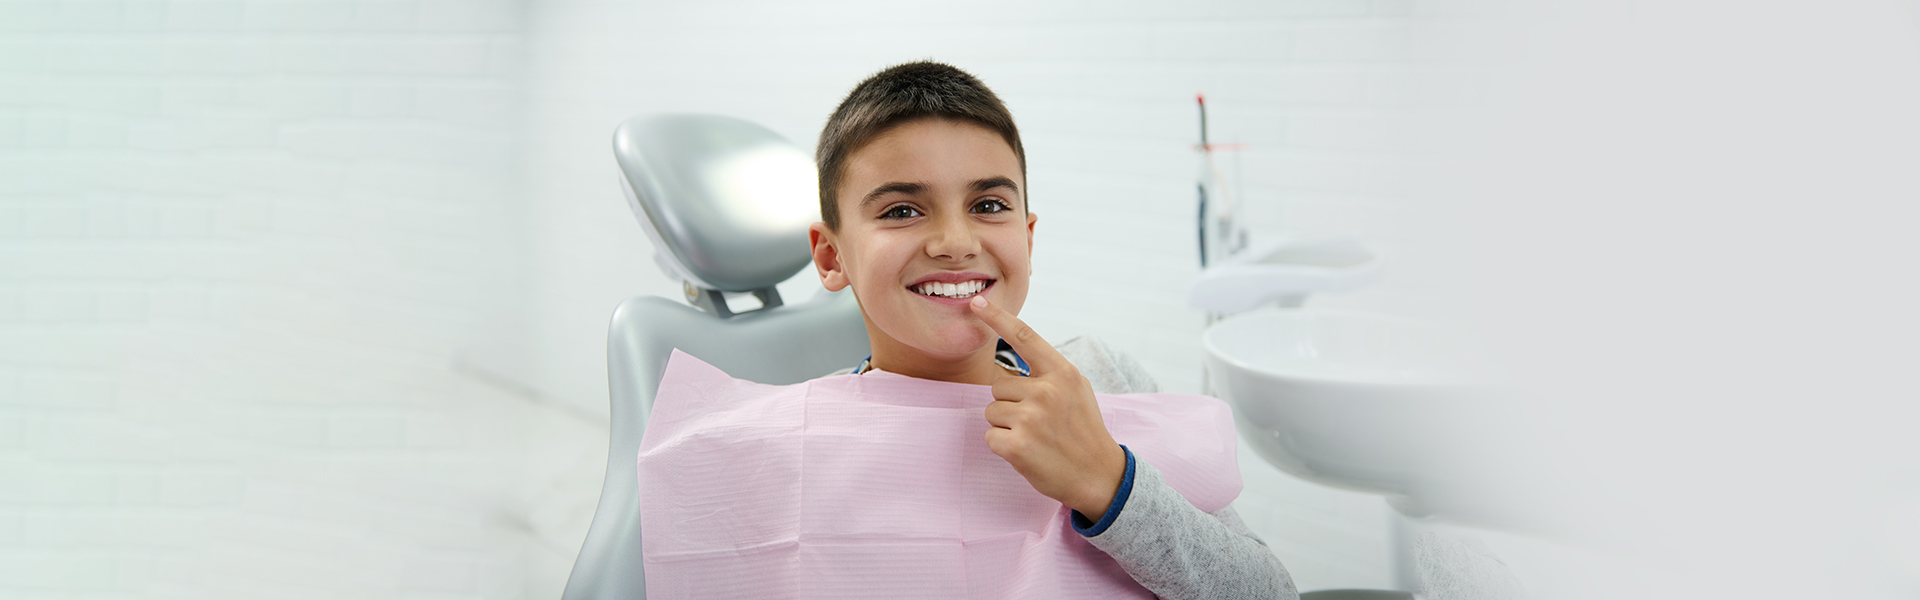 What Does Hospital Dentistry Mean for Your Child?